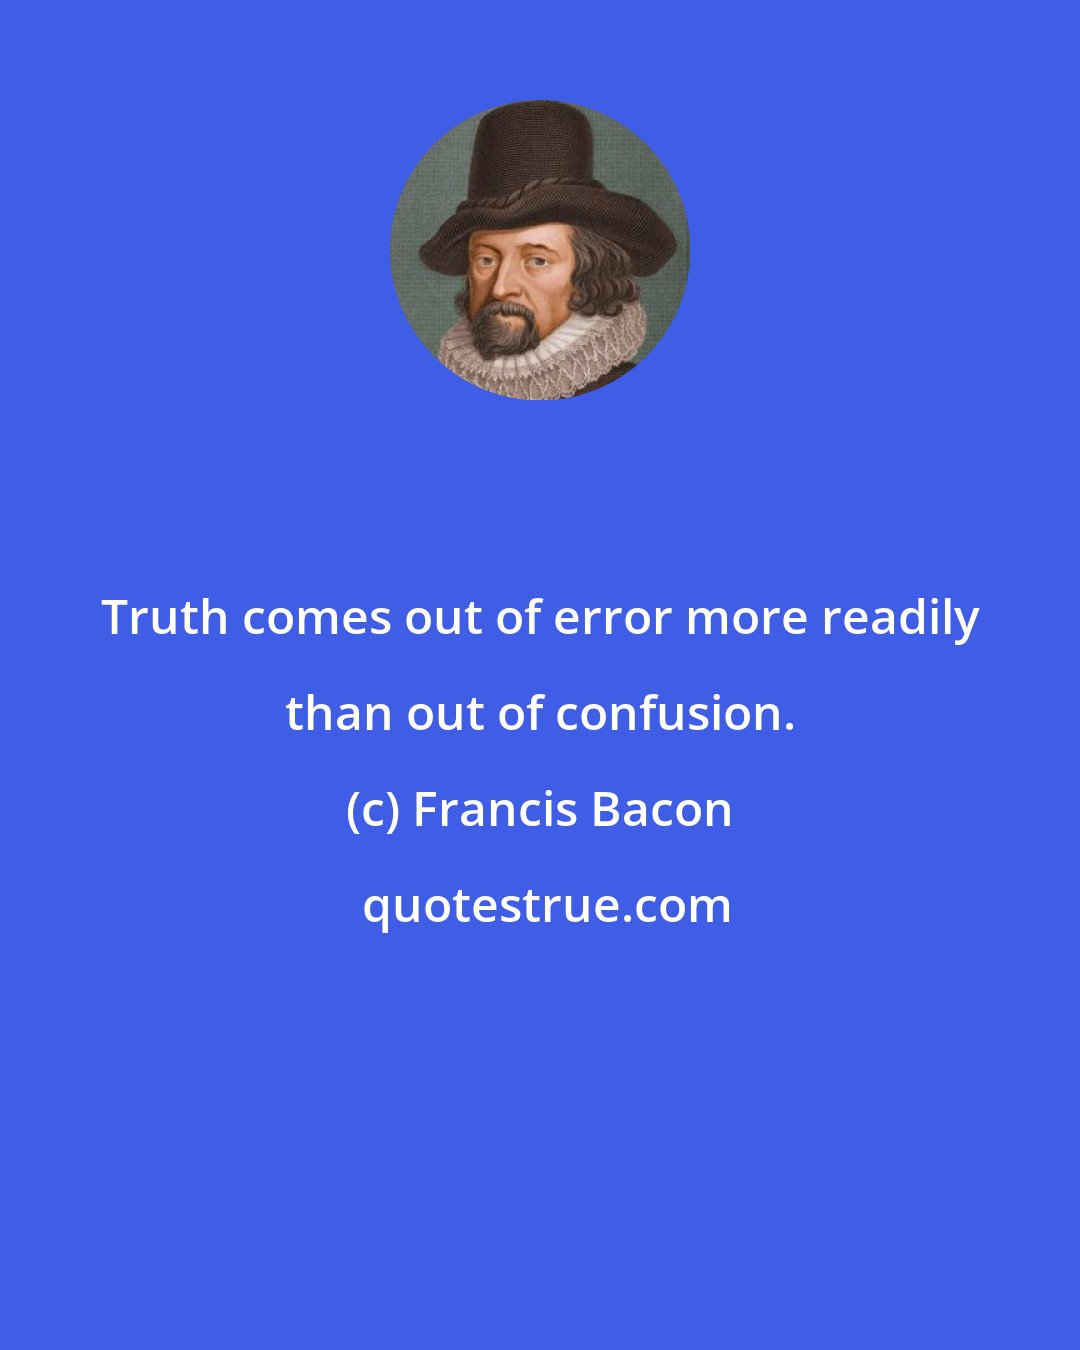 Francis Bacon: Truth comes out of error more readily than out of confusion.